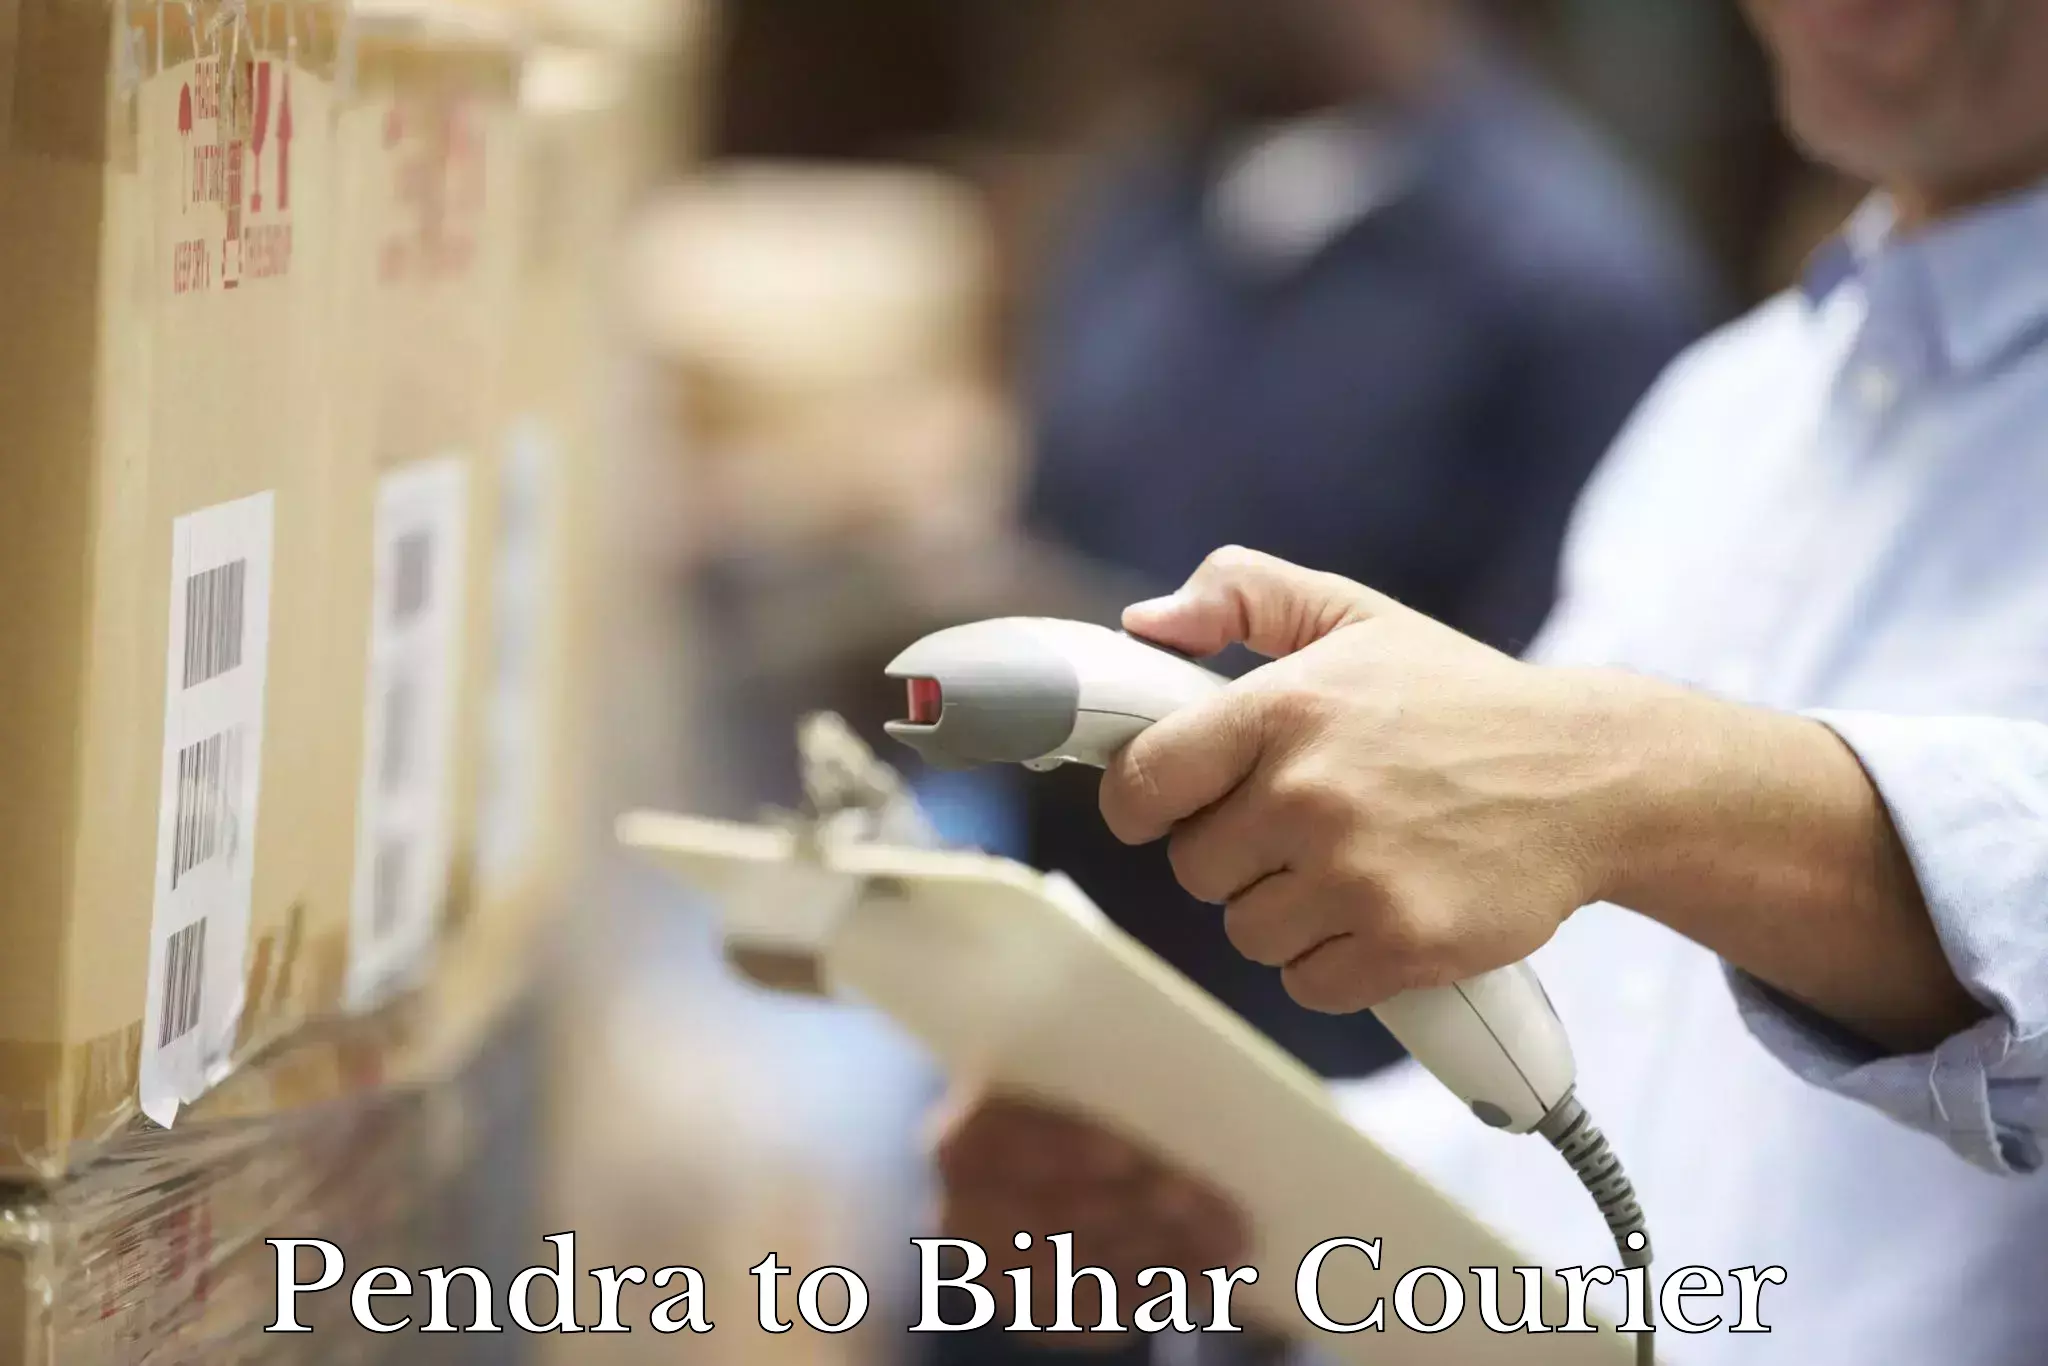 Global shipping networks Pendra to Bihar